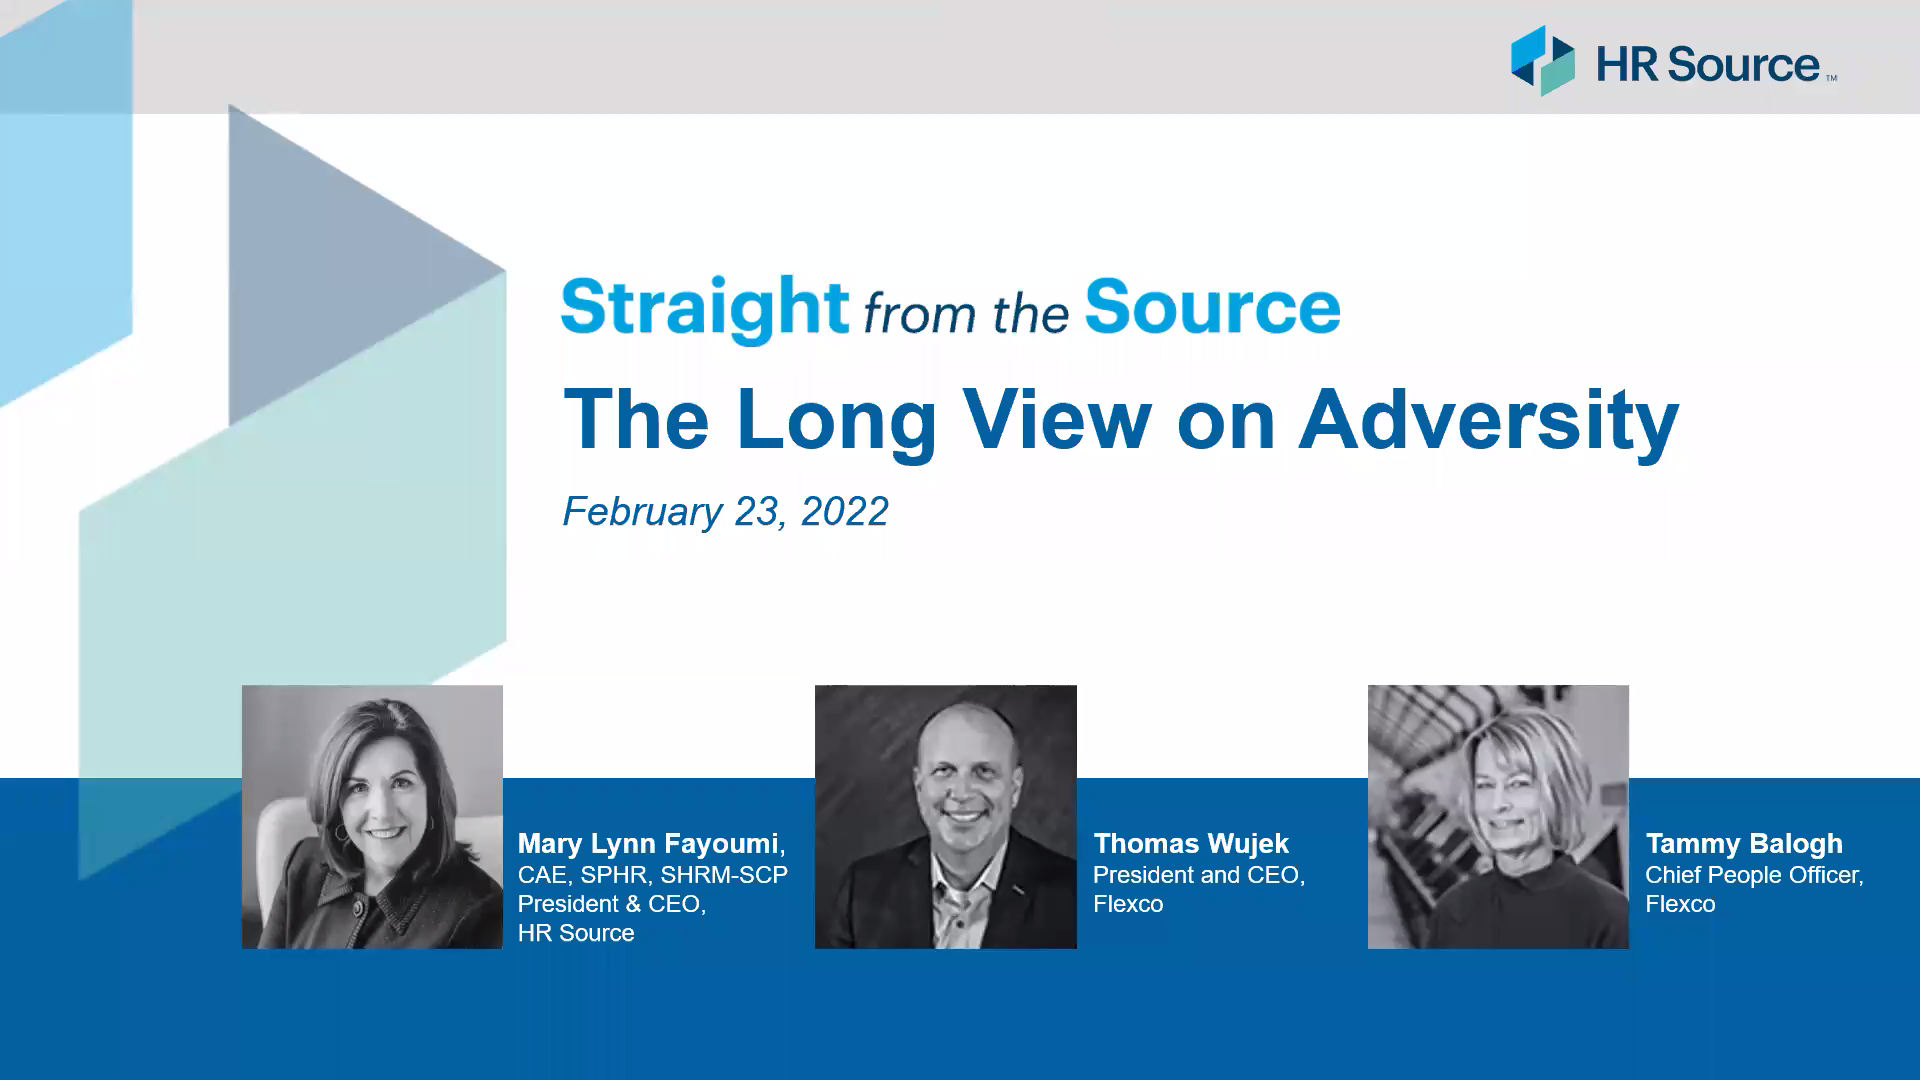 Straight from the Source: The Long View on Adversity